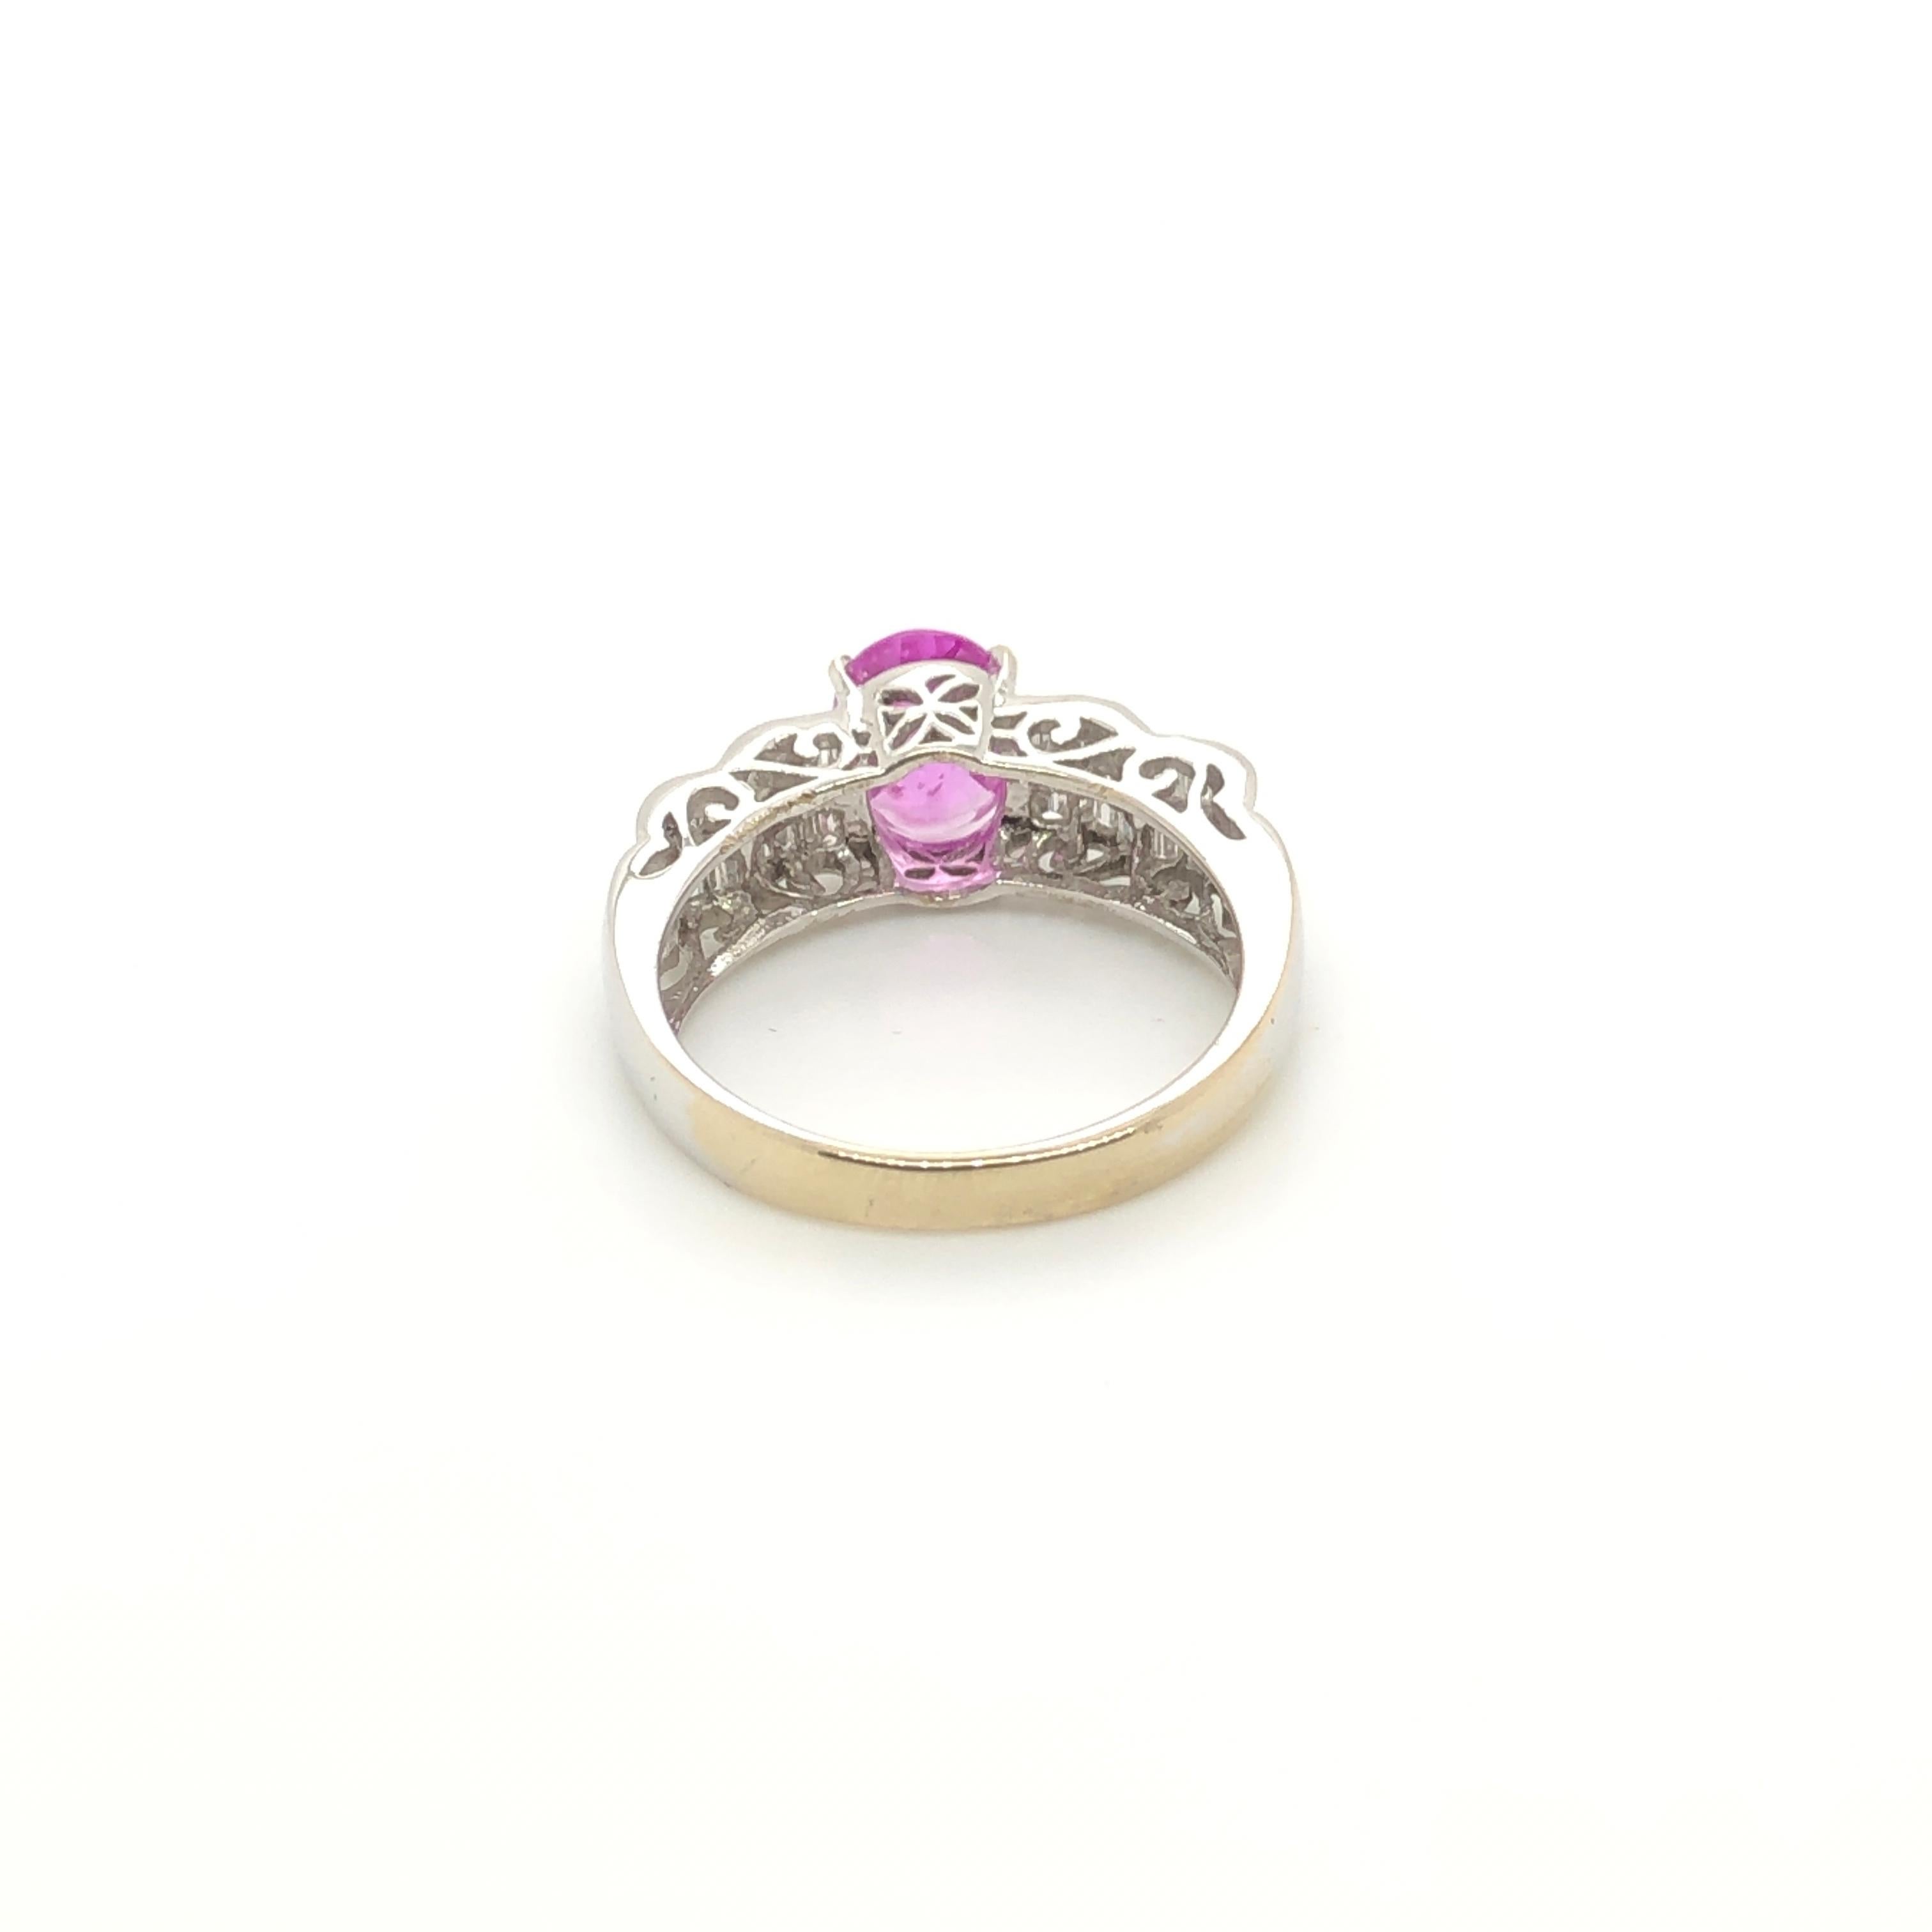 This Le Vian Couture ring in 18k white gold gives new meaning to pretty in pink with its 1-1/2 carat Pink Sapphire center sparkling with 3/8 ct t.w. Vanilla Diamonds.
Ring Size: 6.75